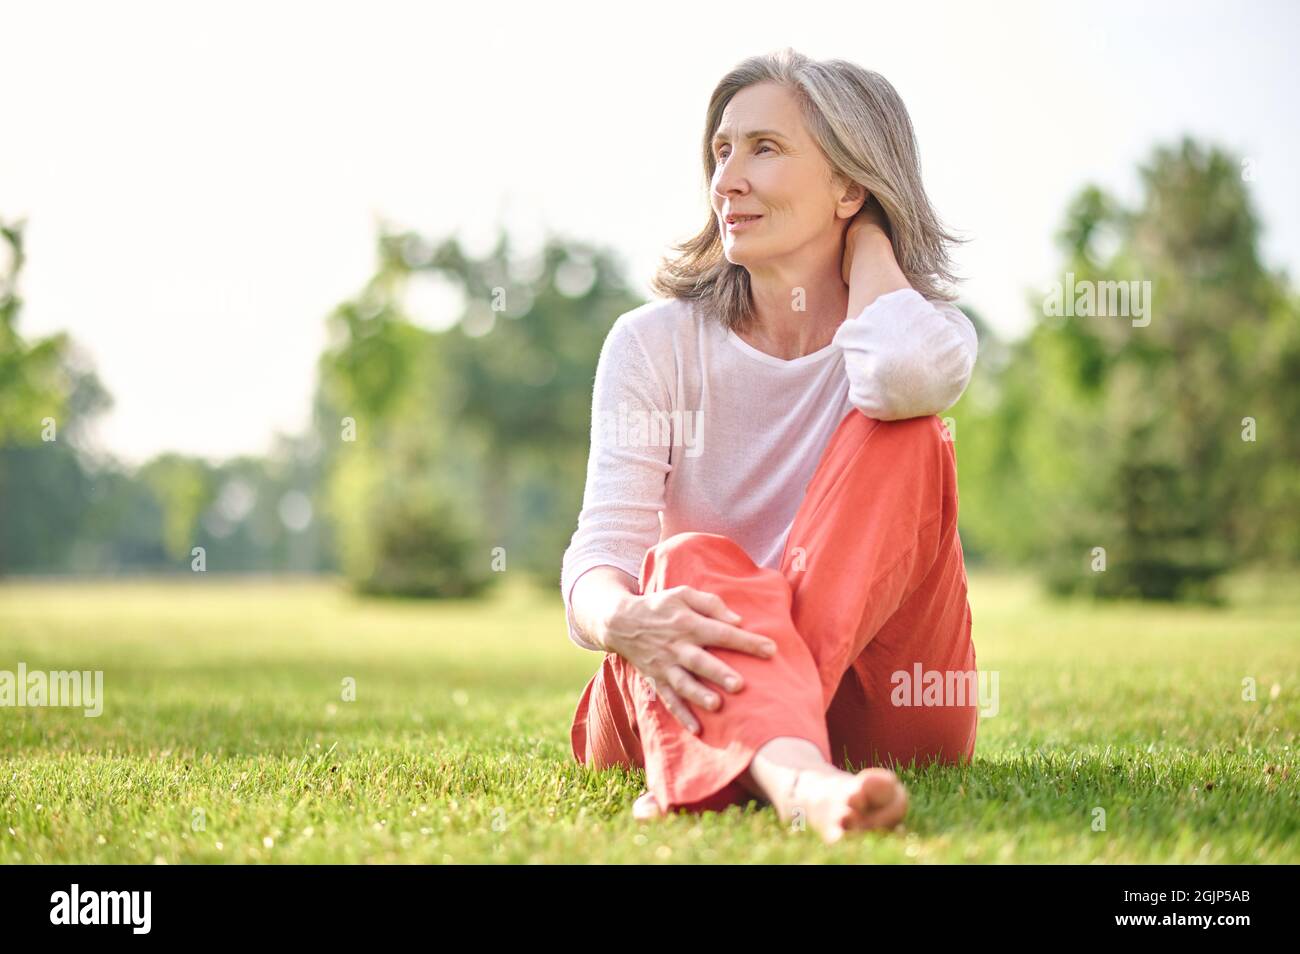 Adult pretty woman meditating on lawn in park Stock Photo